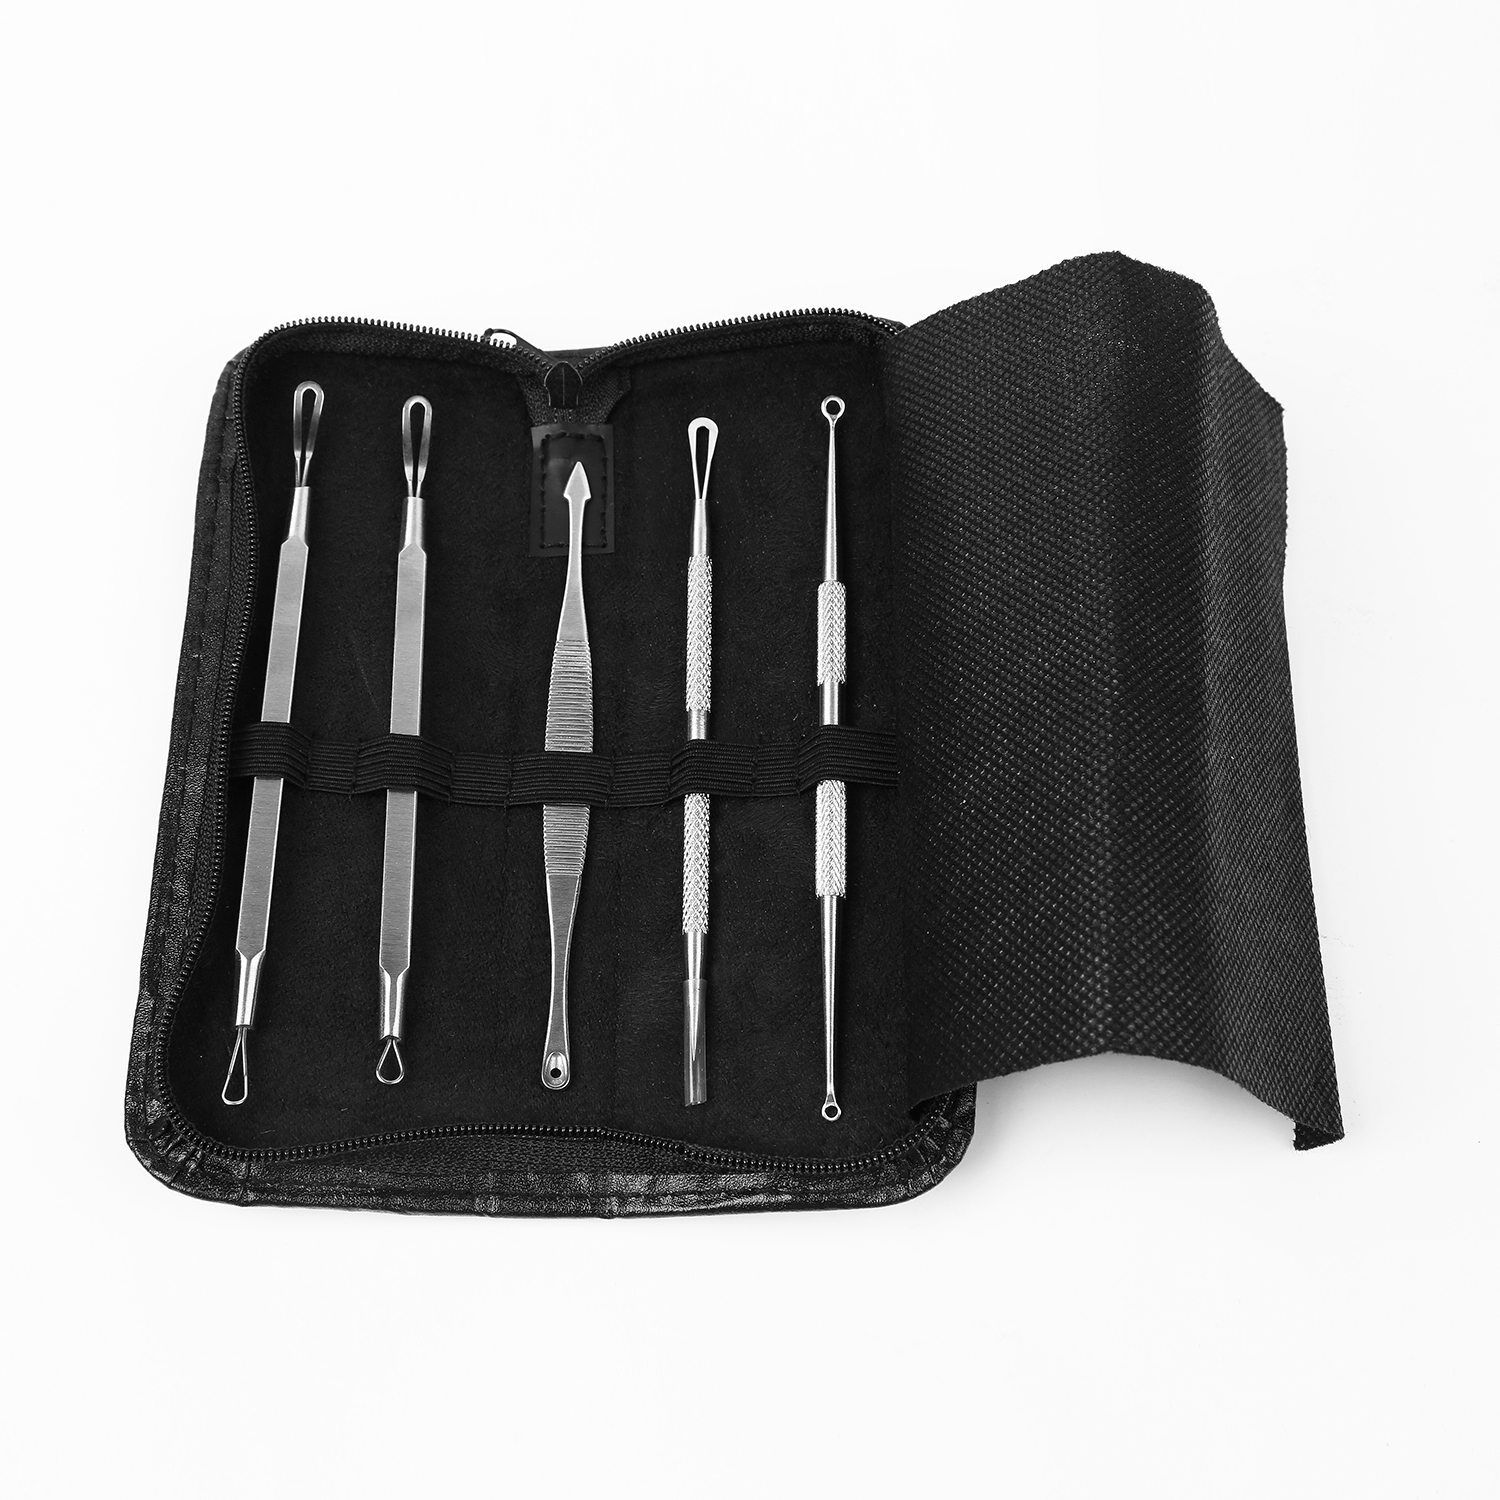 5pcs Blackhead Acne Comedone Pimple Blemish Extractor Remover Stainless Tool Kit KOCASO GPCT654